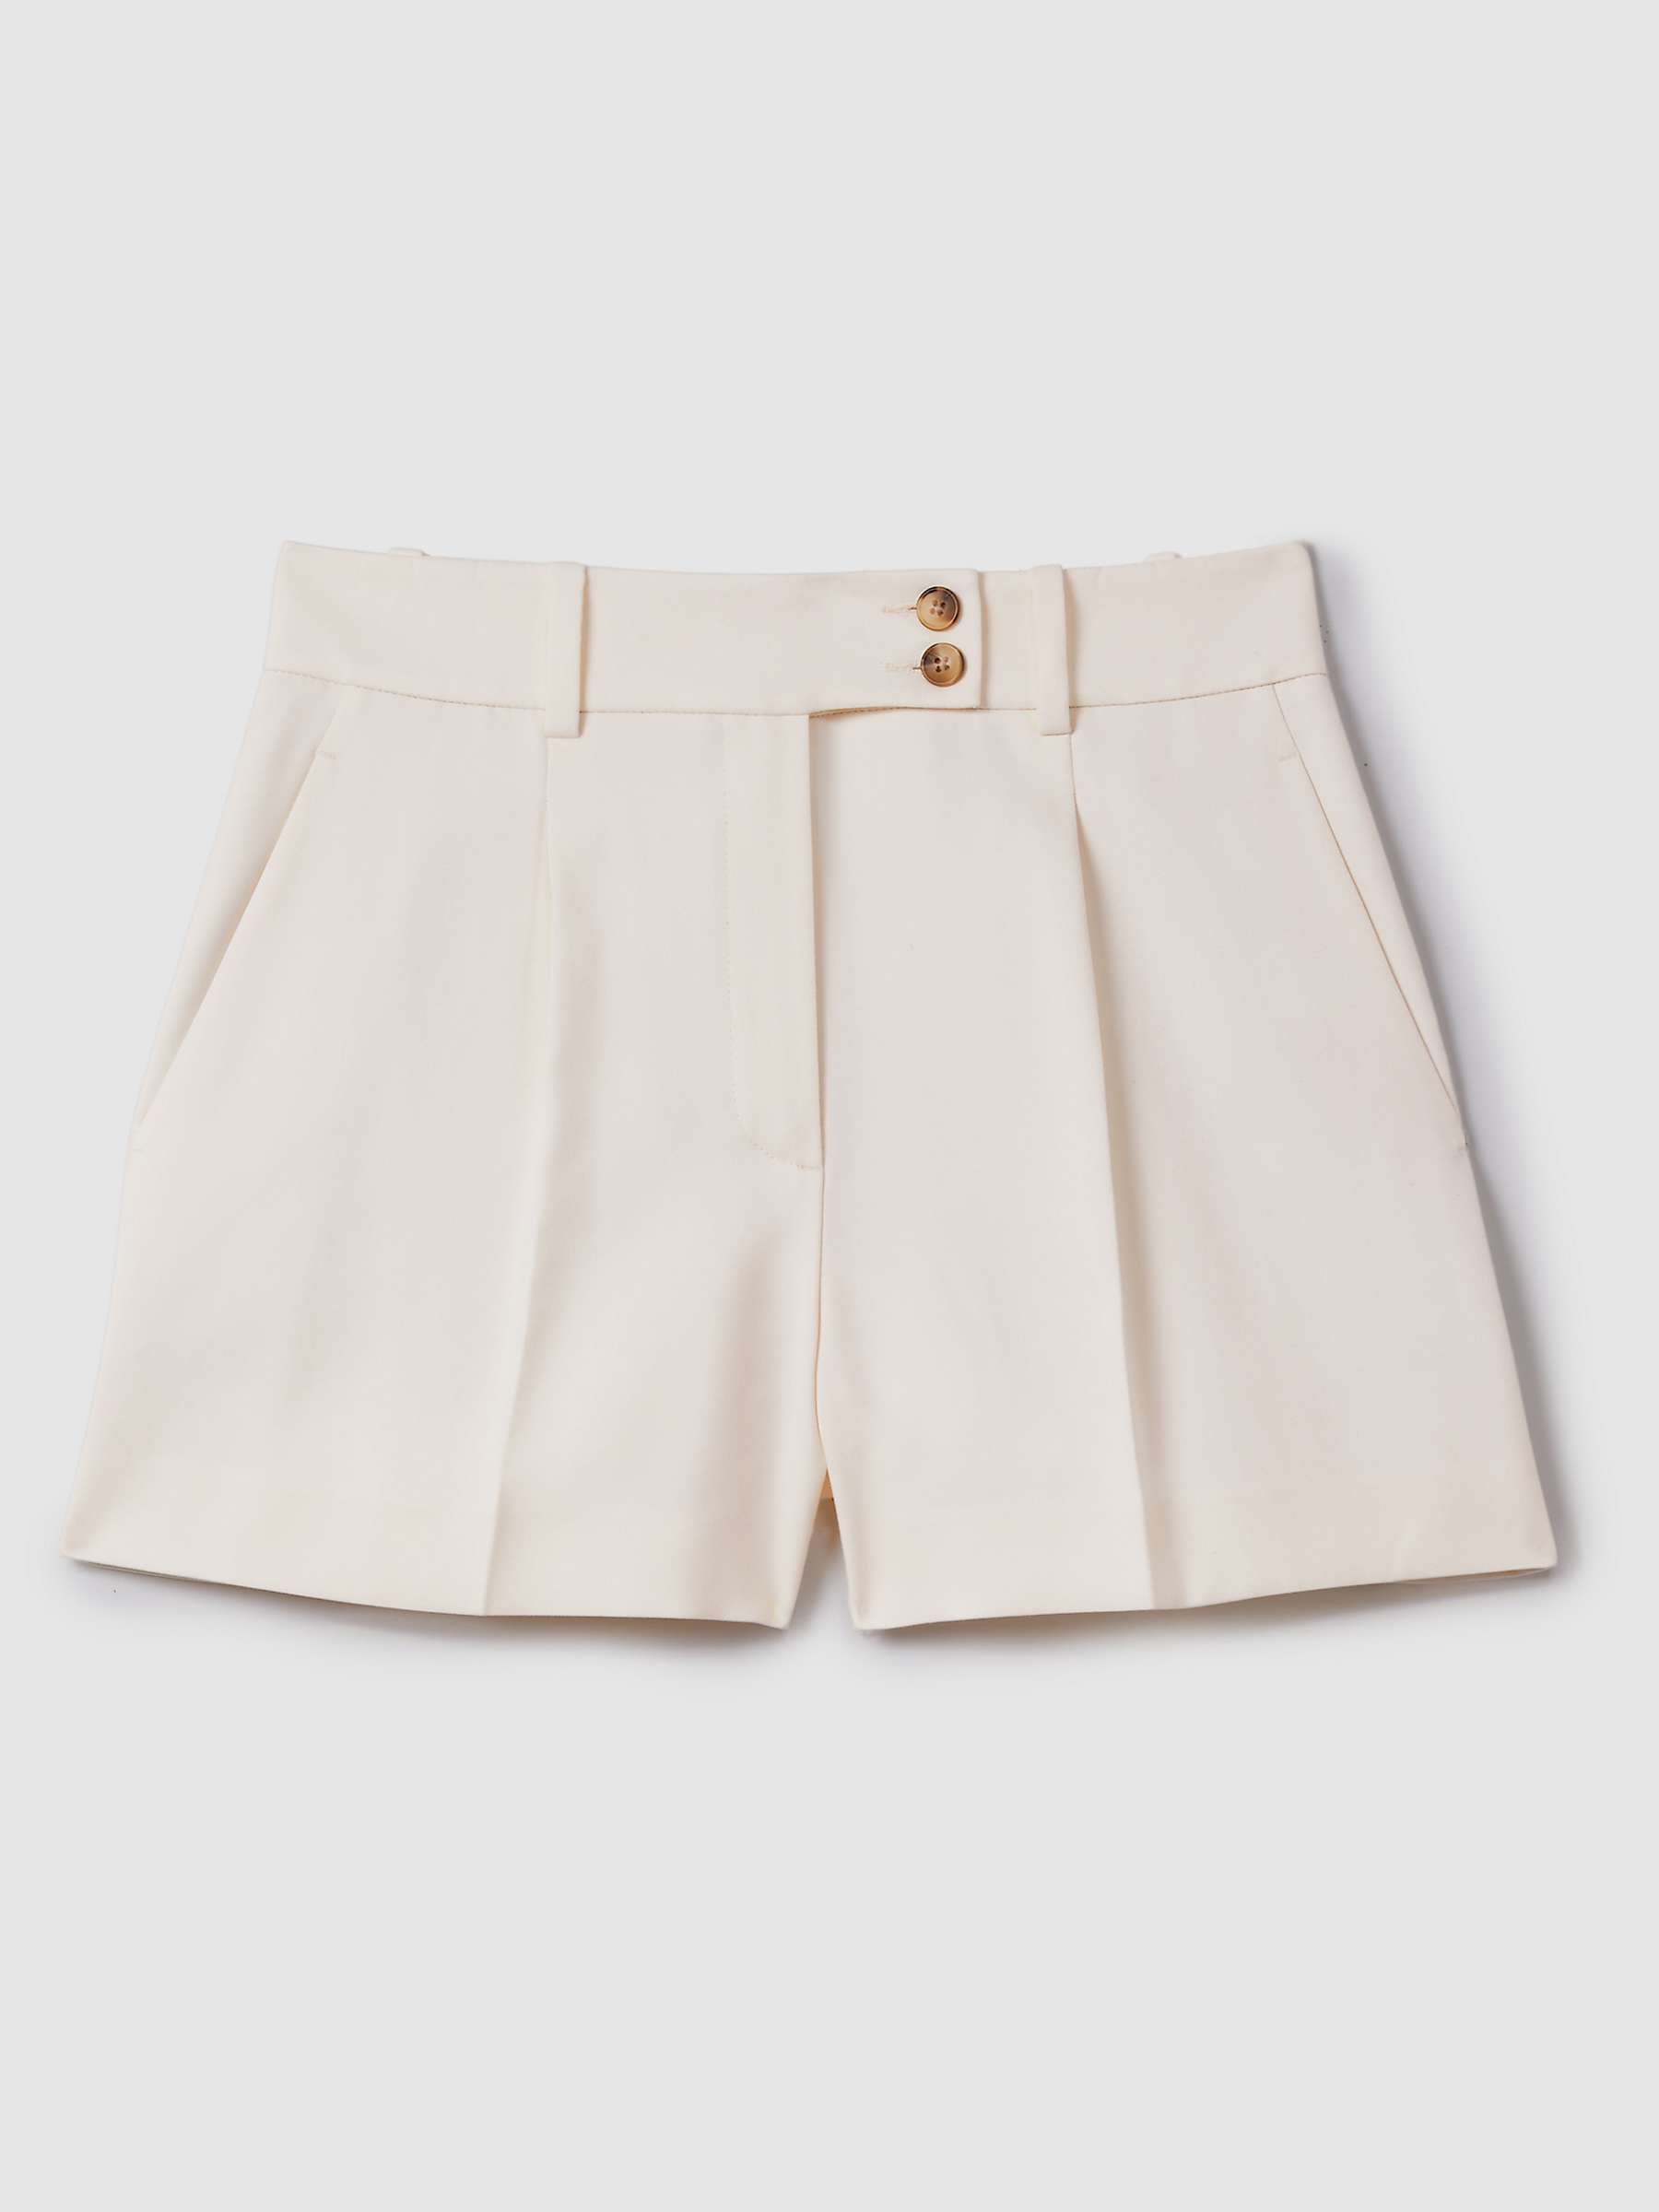 Buy Reiss Millie Pleat Front Tailored Shorts, Cream Online at johnlewis.com